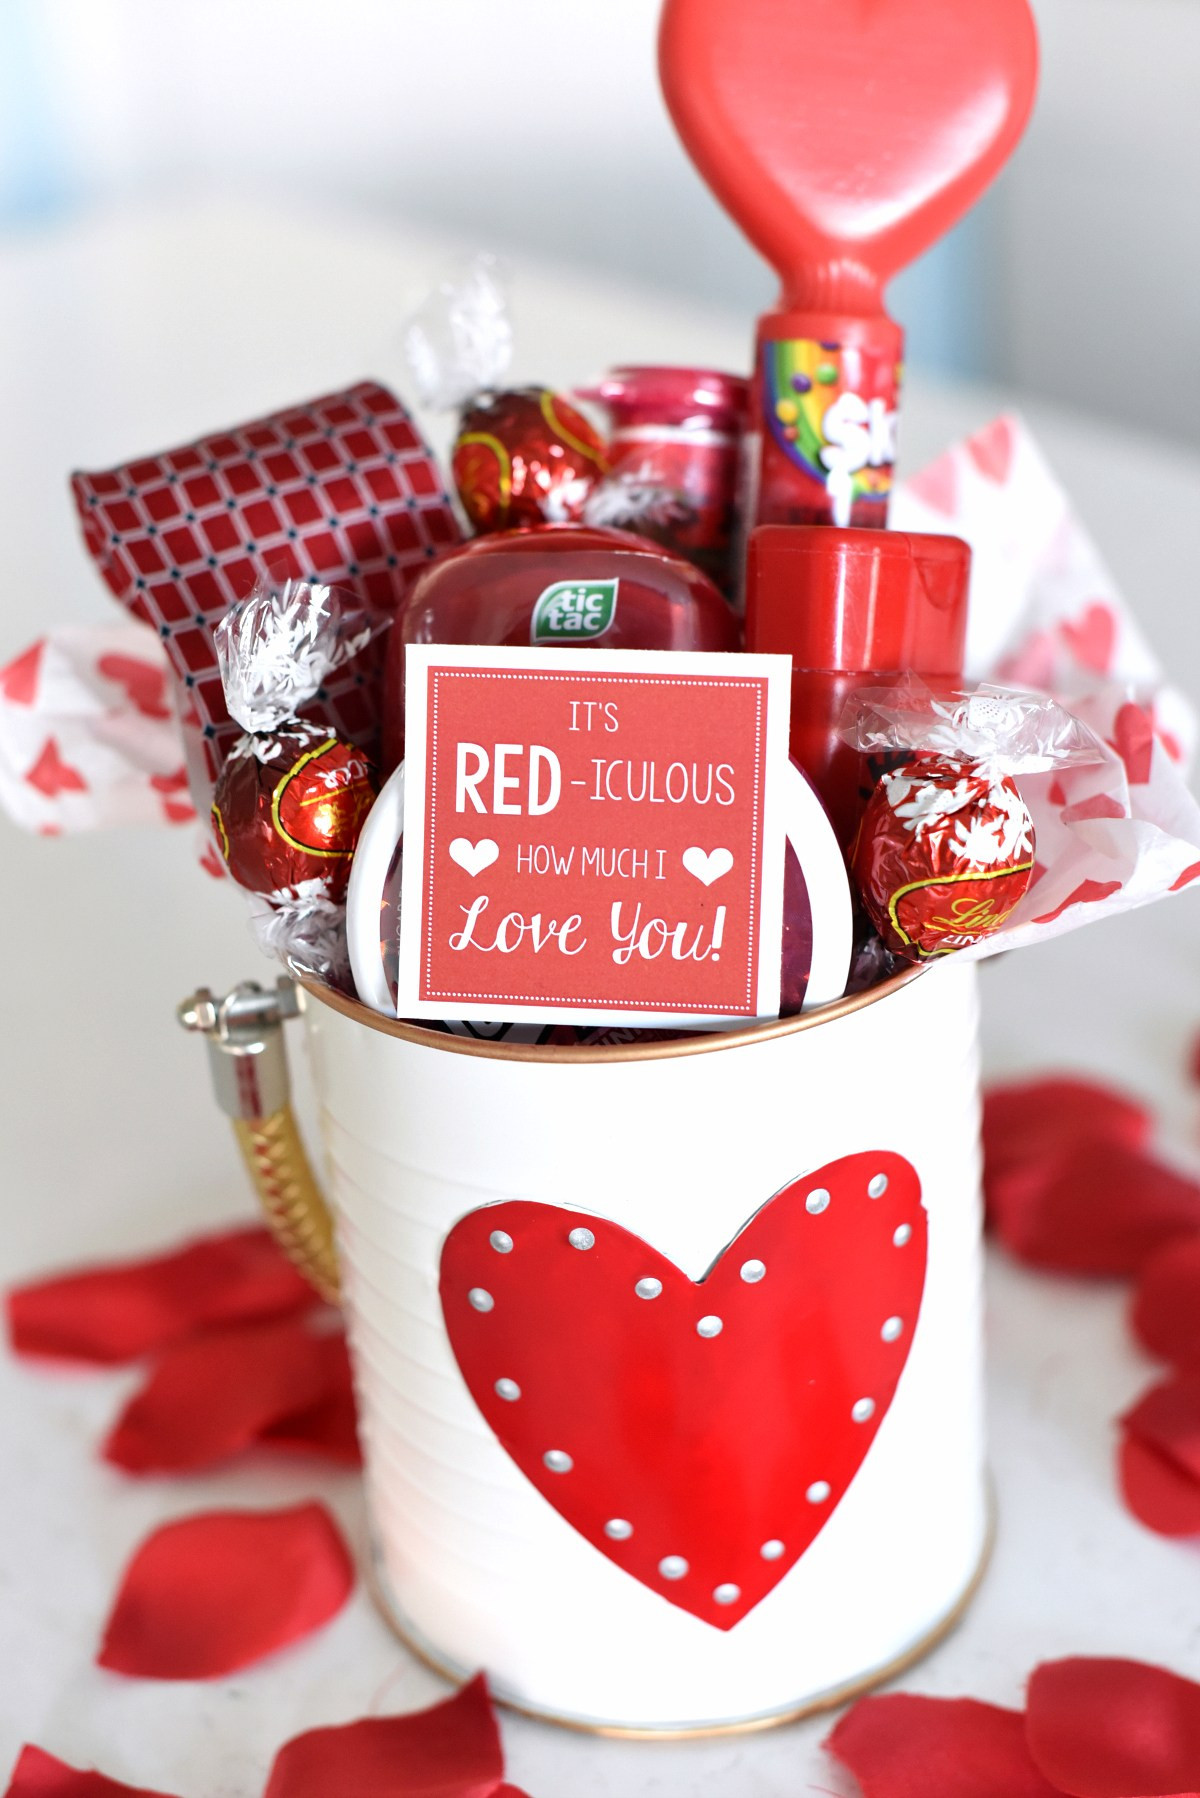 Valentines Gift Ideas For Your Husband
 25 DIY Valentine s Day Gift Ideas Teens Will Love